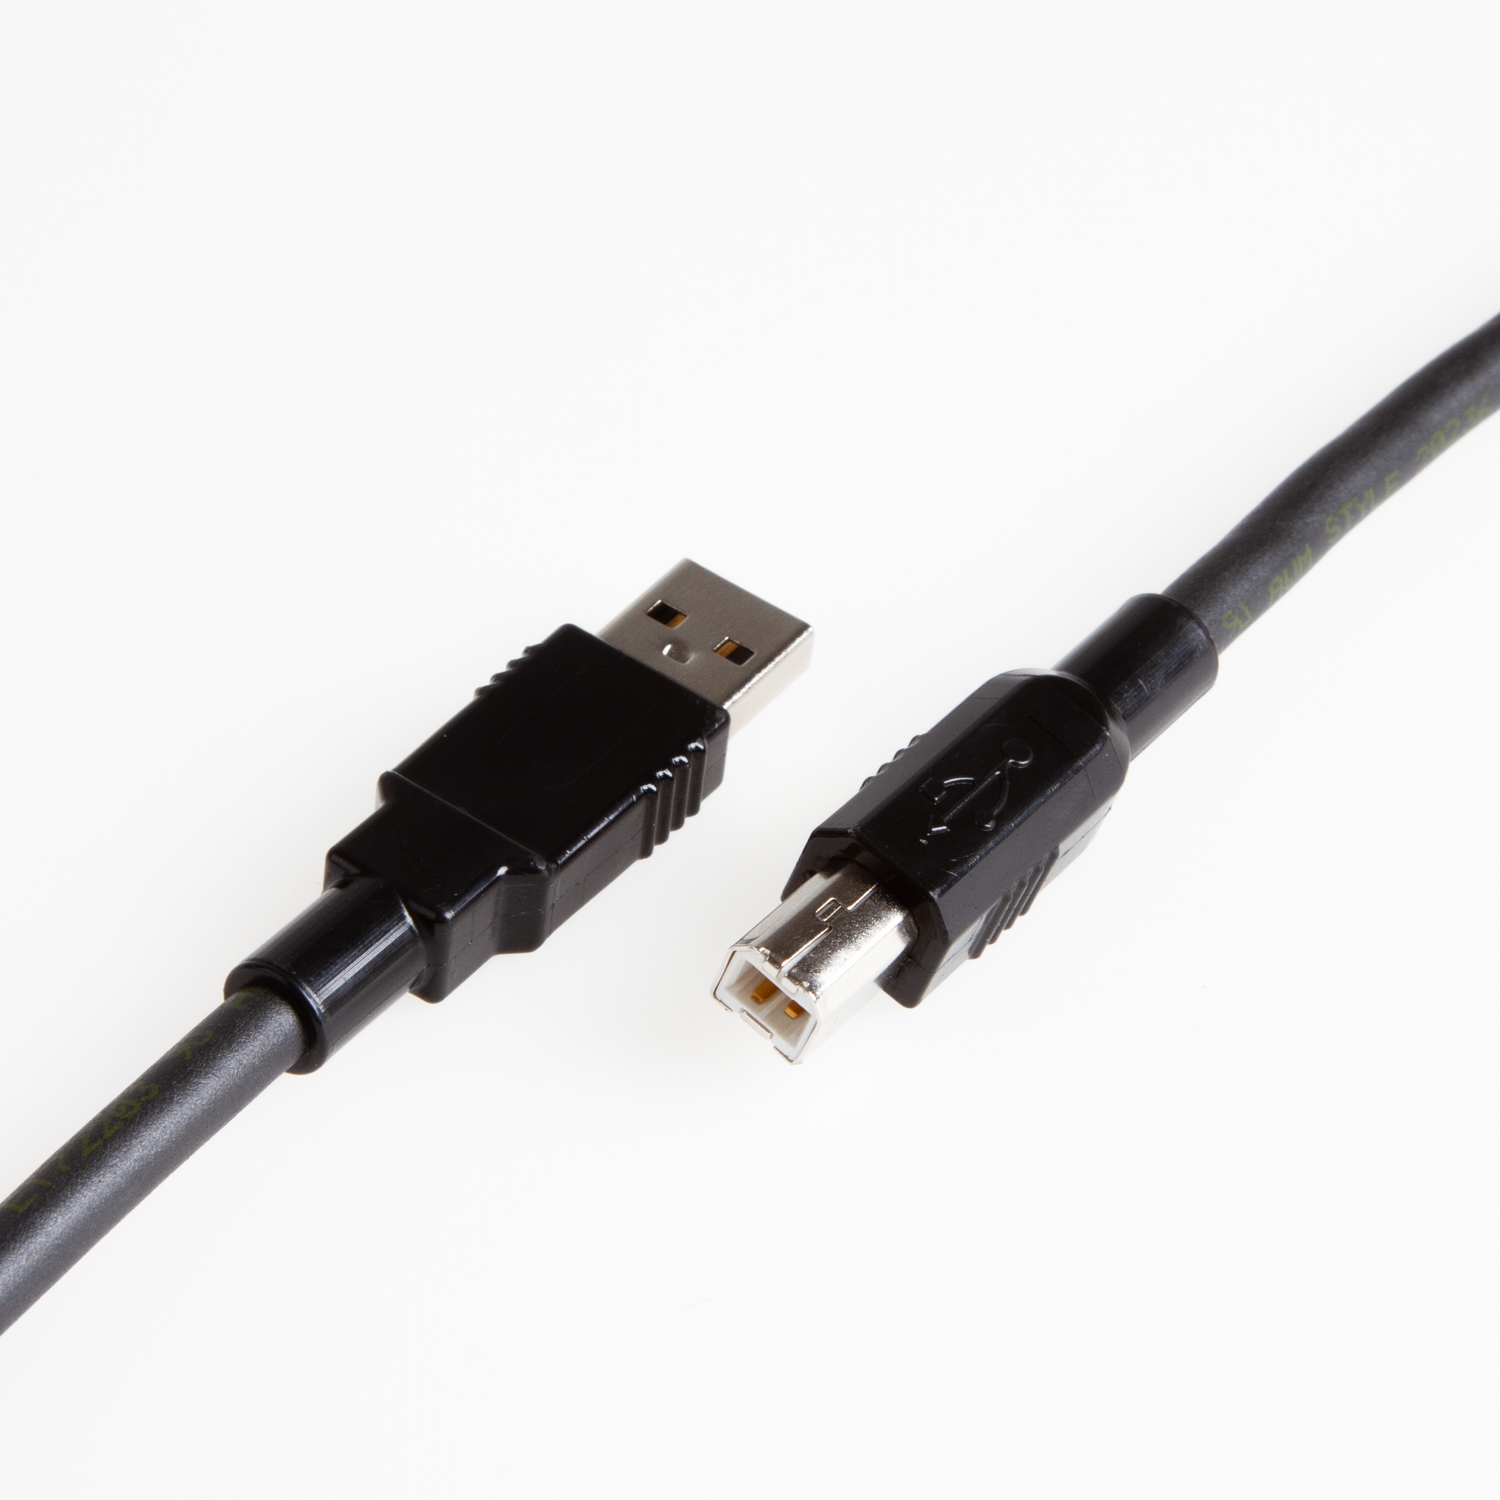 USB 2.0 PUR cable for industry + drag chains, type A to B, 3m